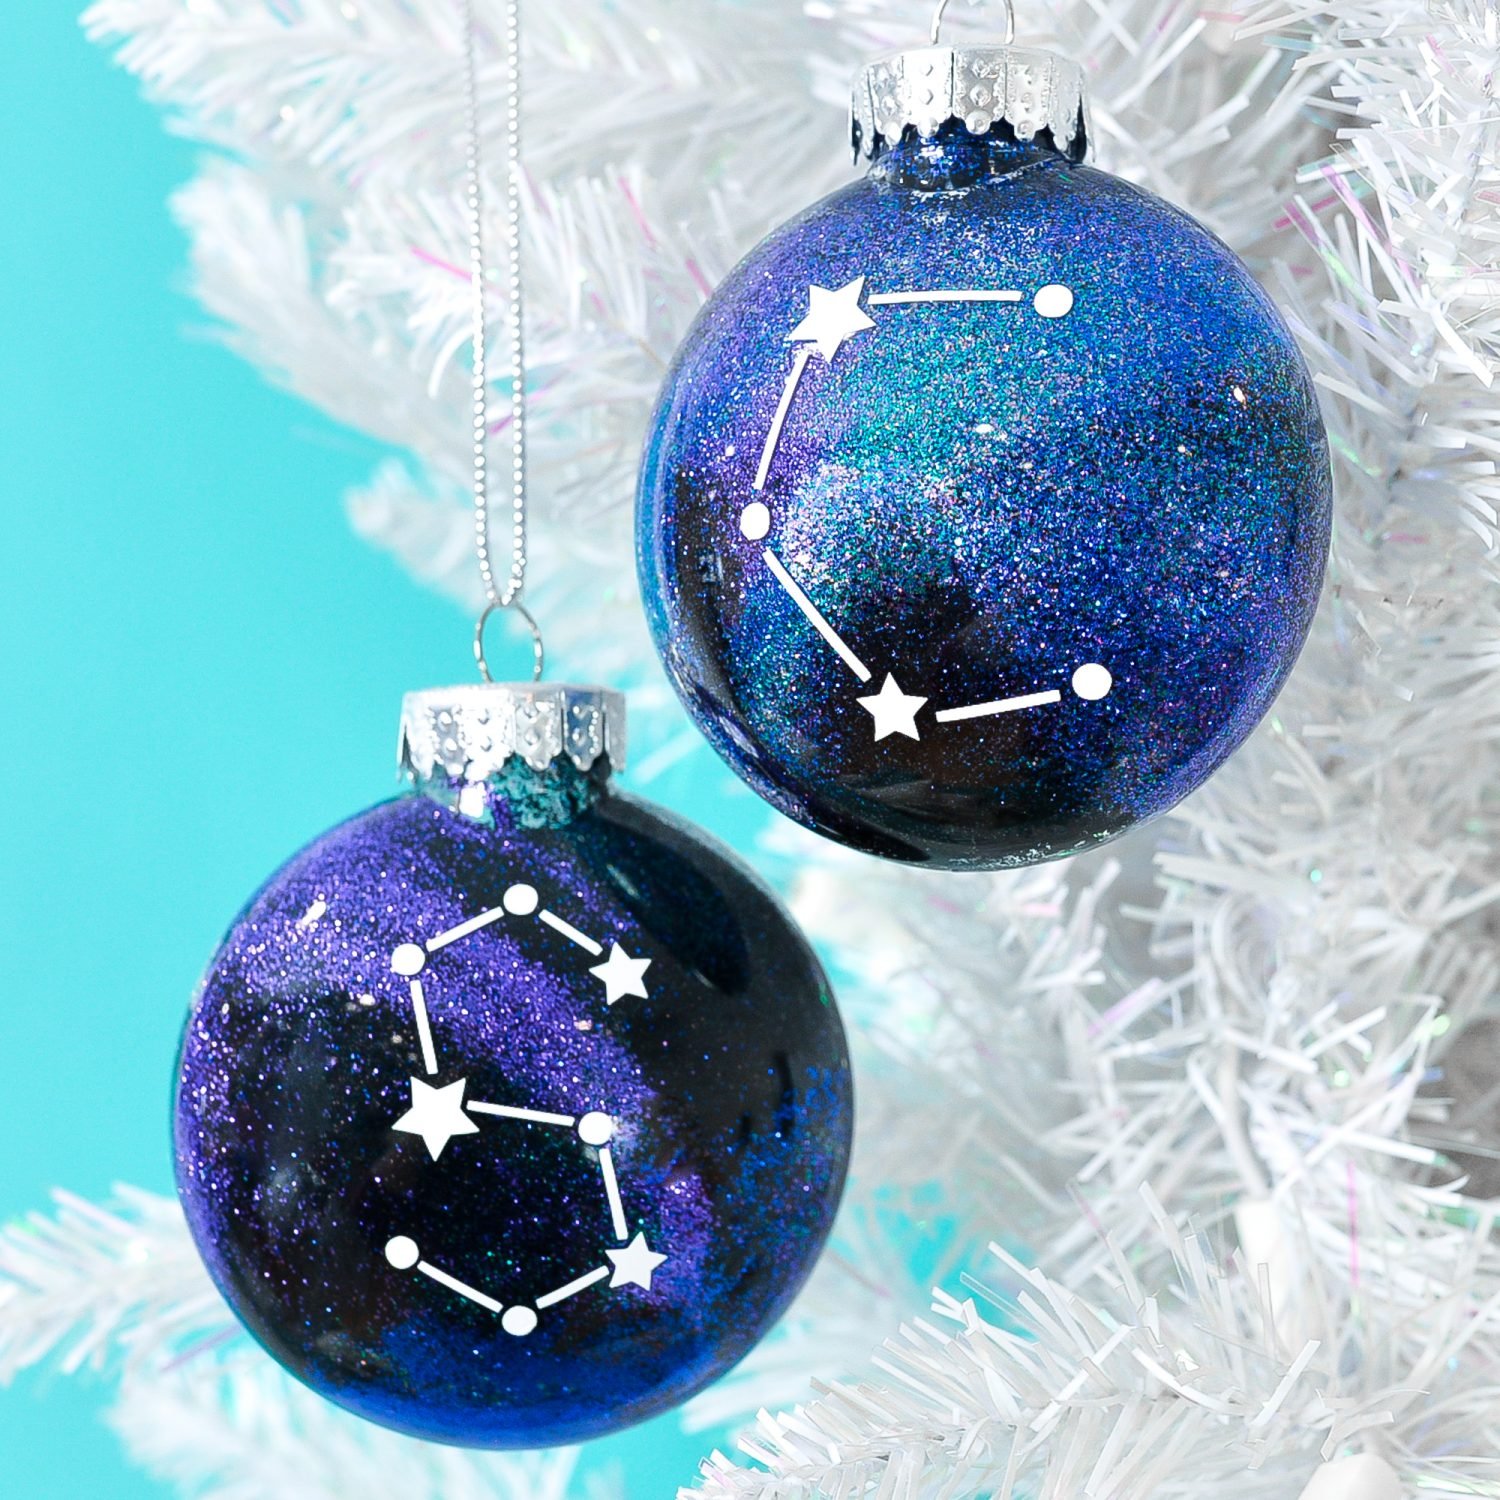 Finished constellation glitter ornaments hanging from white Christmas tree